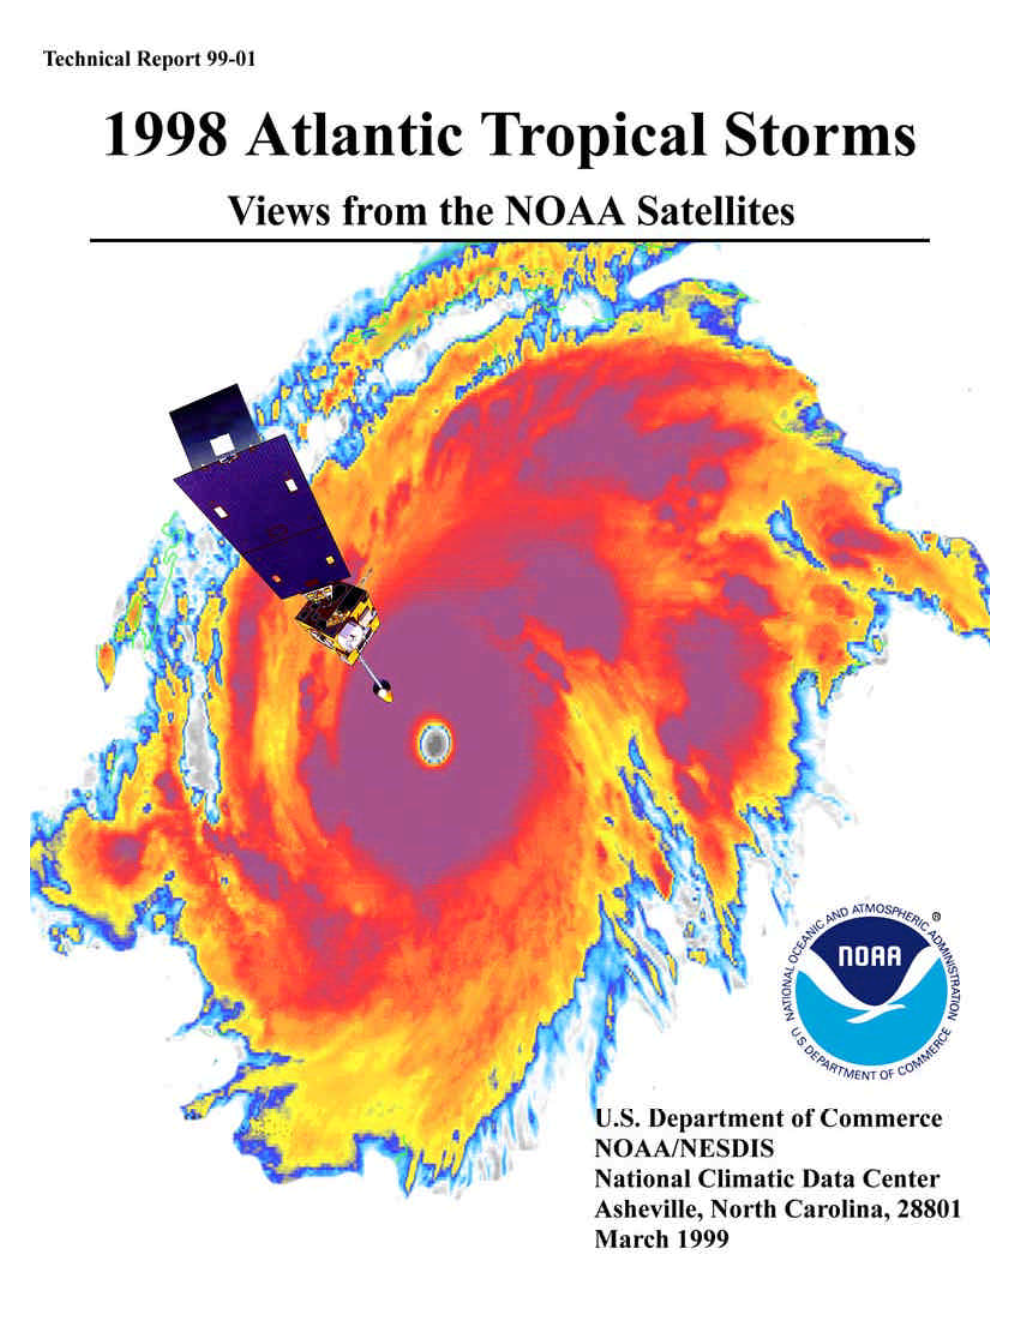 1998 Atlantic Tropical Storms: Views from the NOAA Satellites